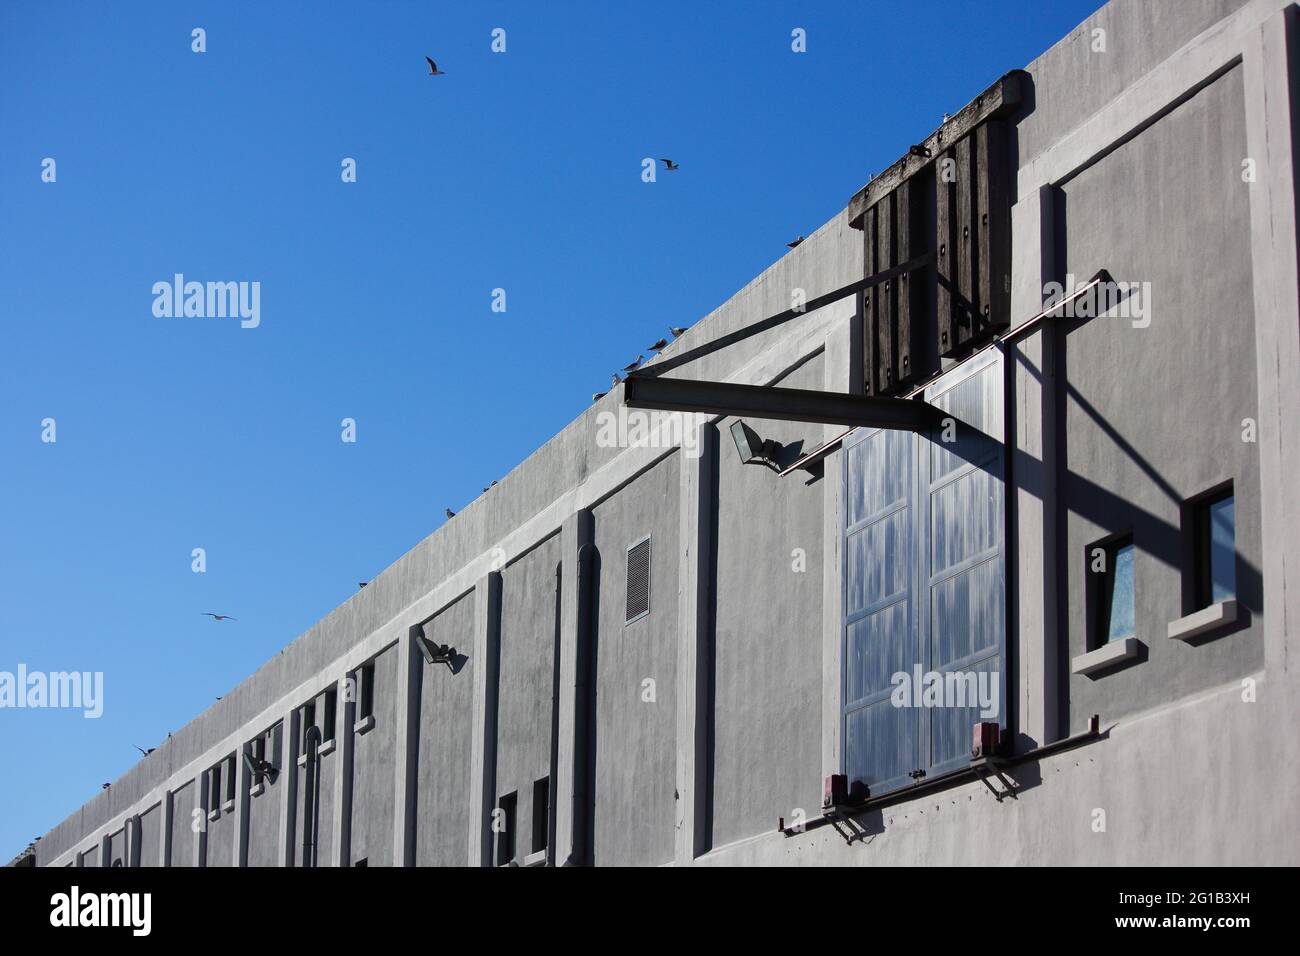 Shipping Warehouse Building Elevated Loading Bay Door Stock Photo